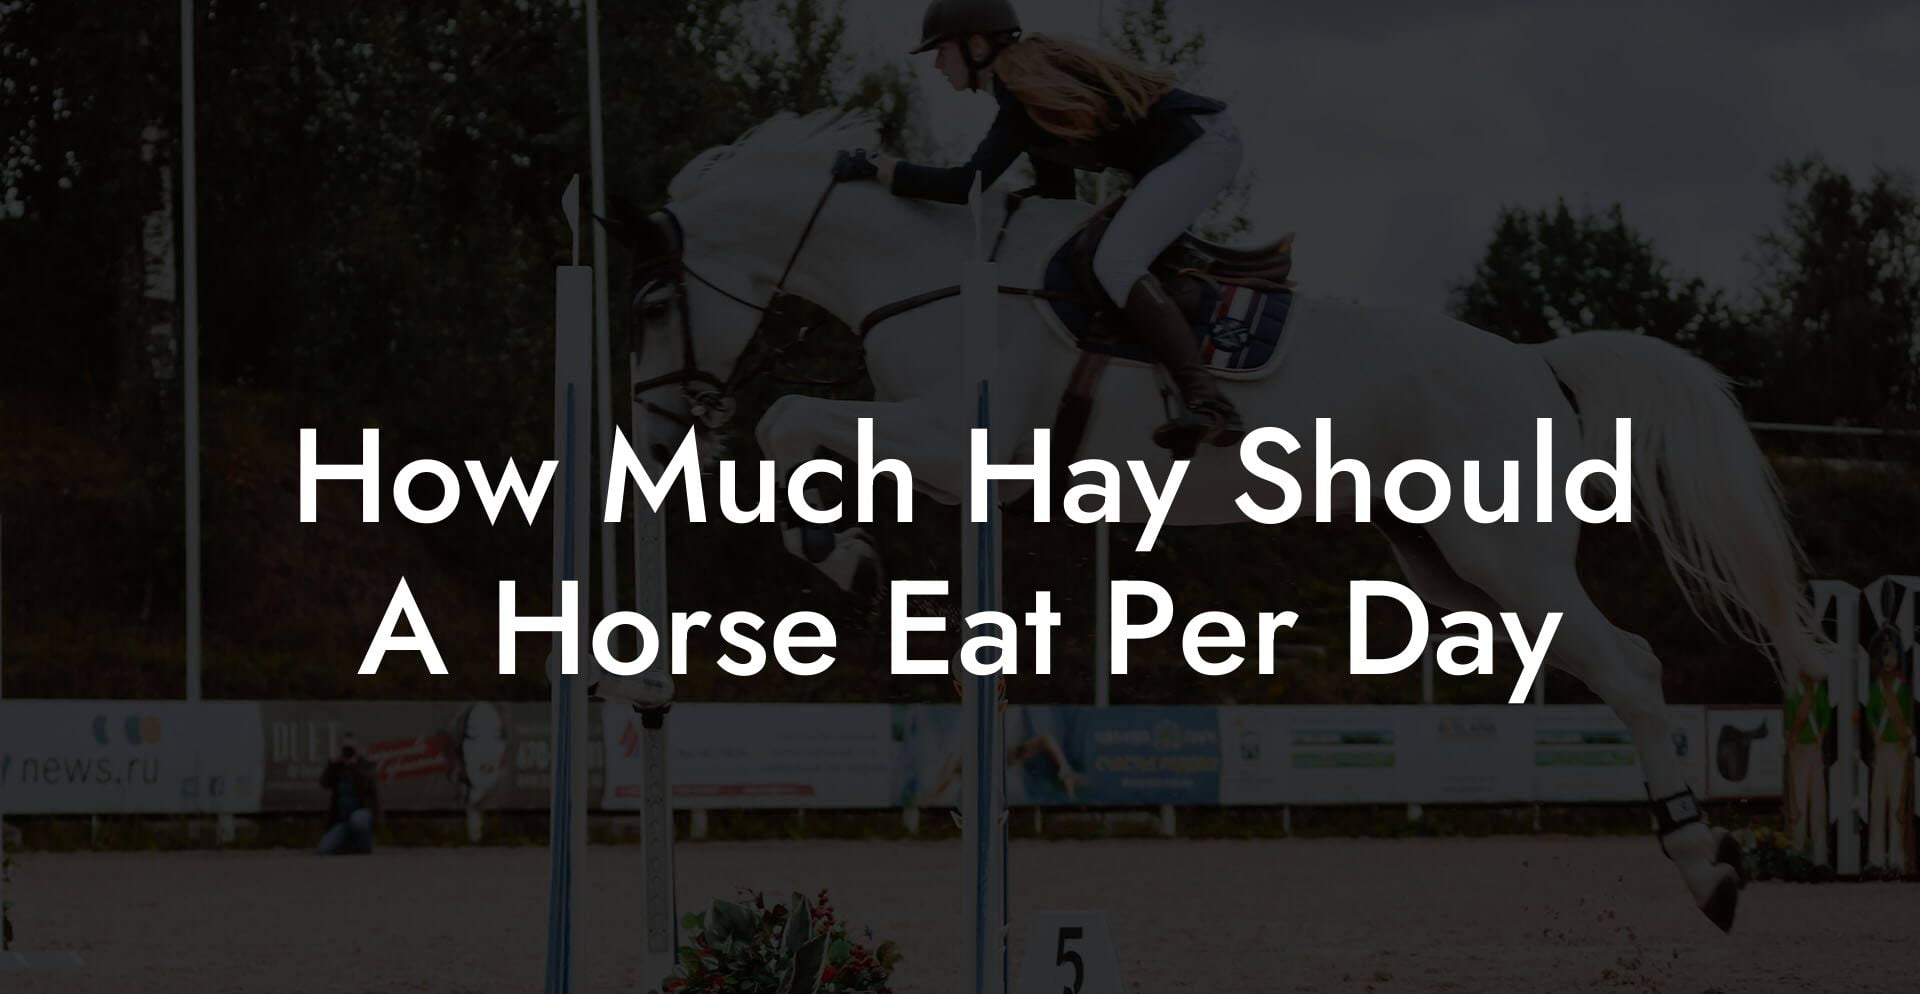 How Much Hay Should A Horse Eat Per Day